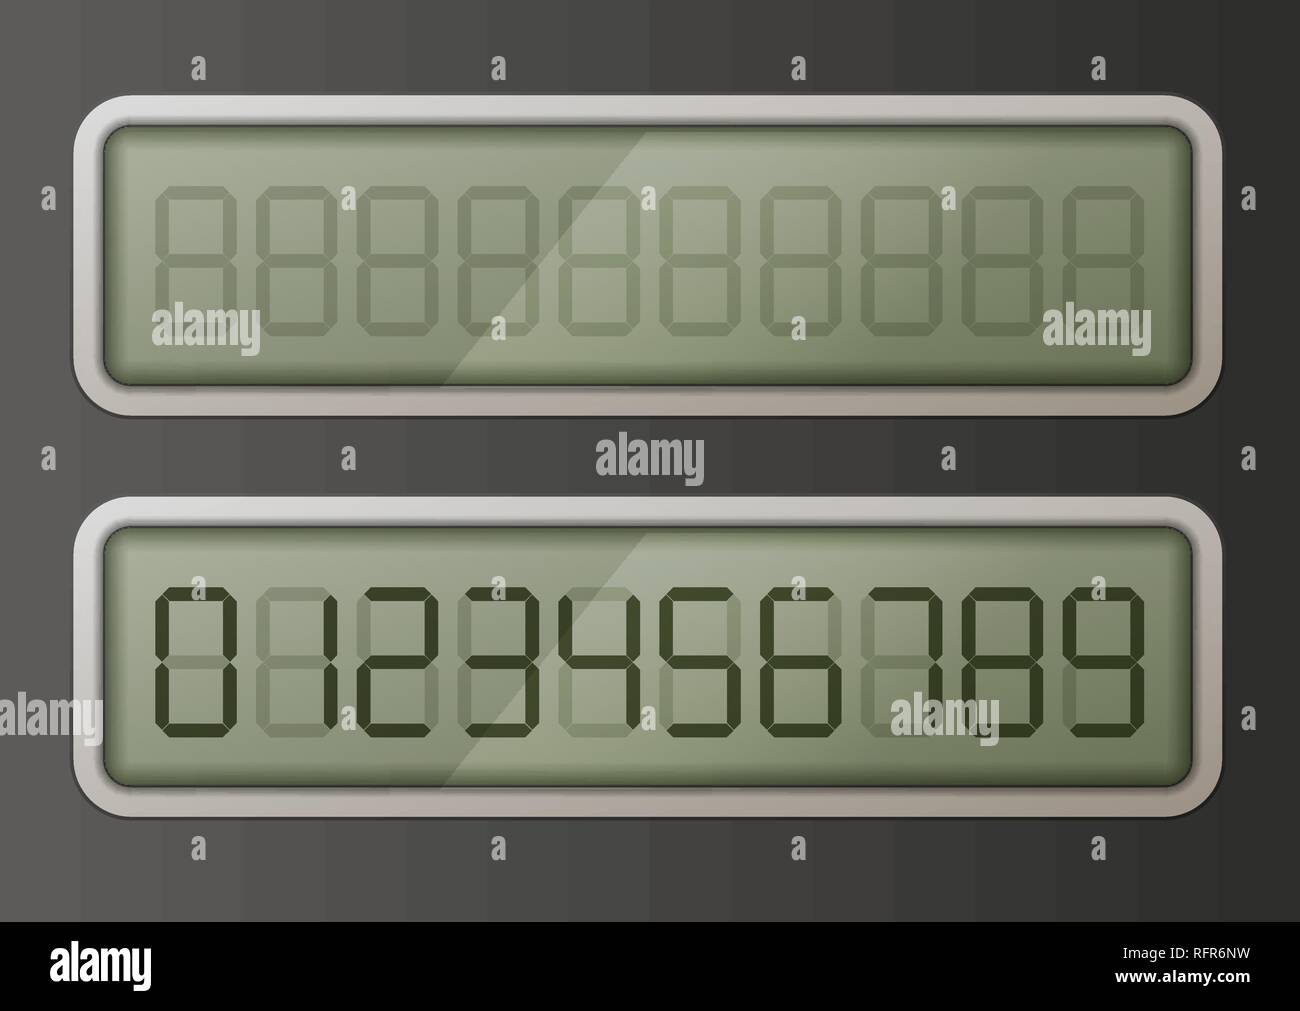 https://c8.alamy.com/comp/RFR6NW/set-of-retro-digital-electronic-numbers-on-green-display-RFR6NW.jpg